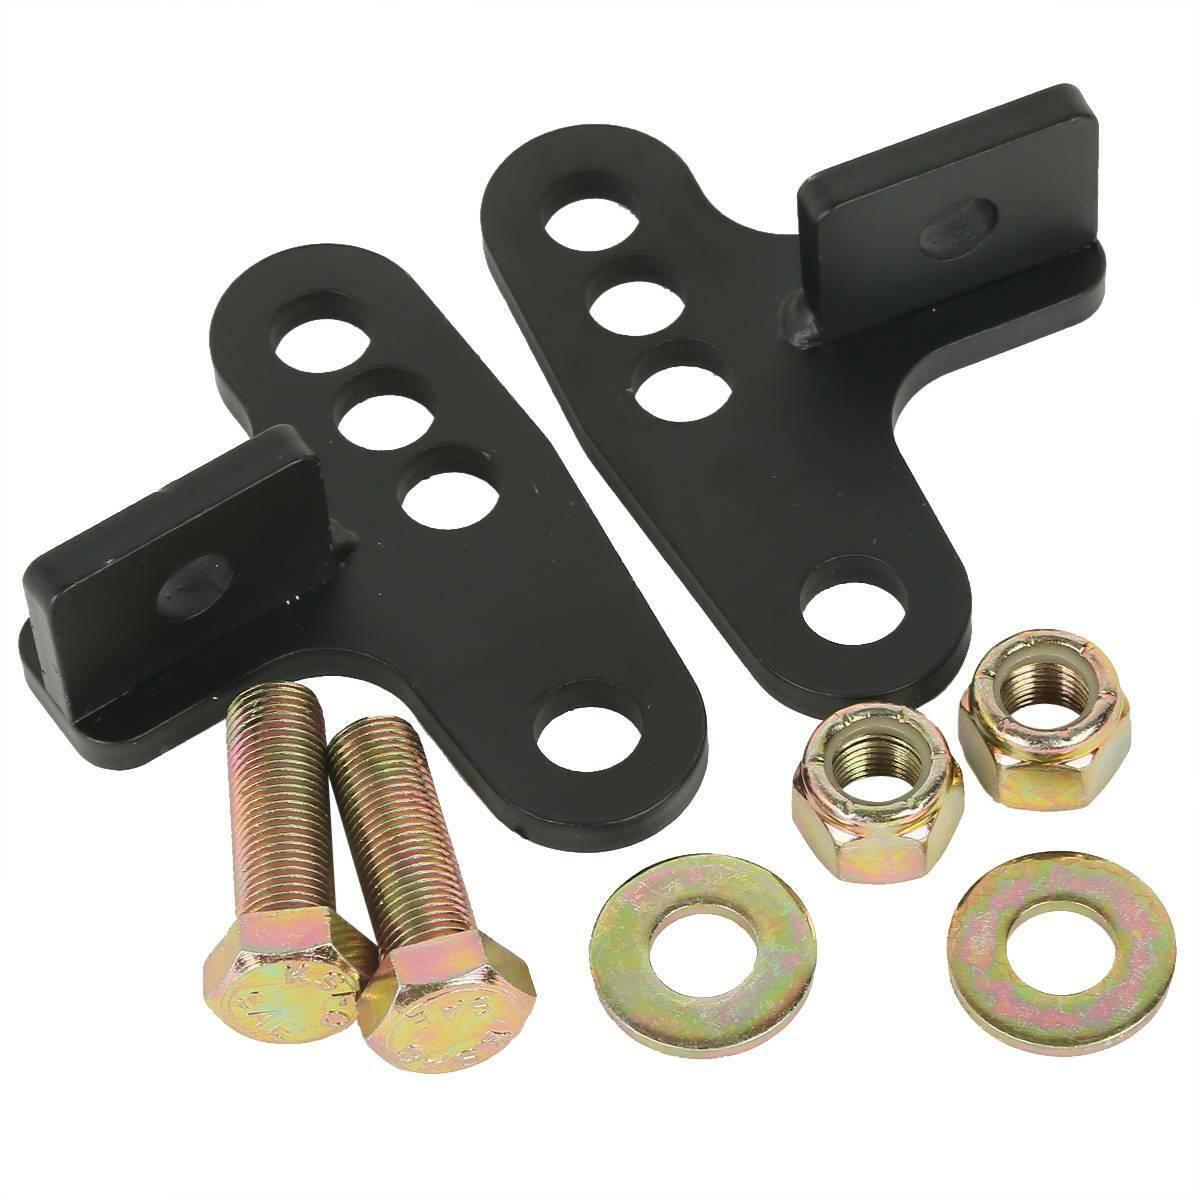 1-3" Adjustable Rear Lowering Kit For Harley Sportster Iron 883 1200 1988-1999 - Moto Life Products